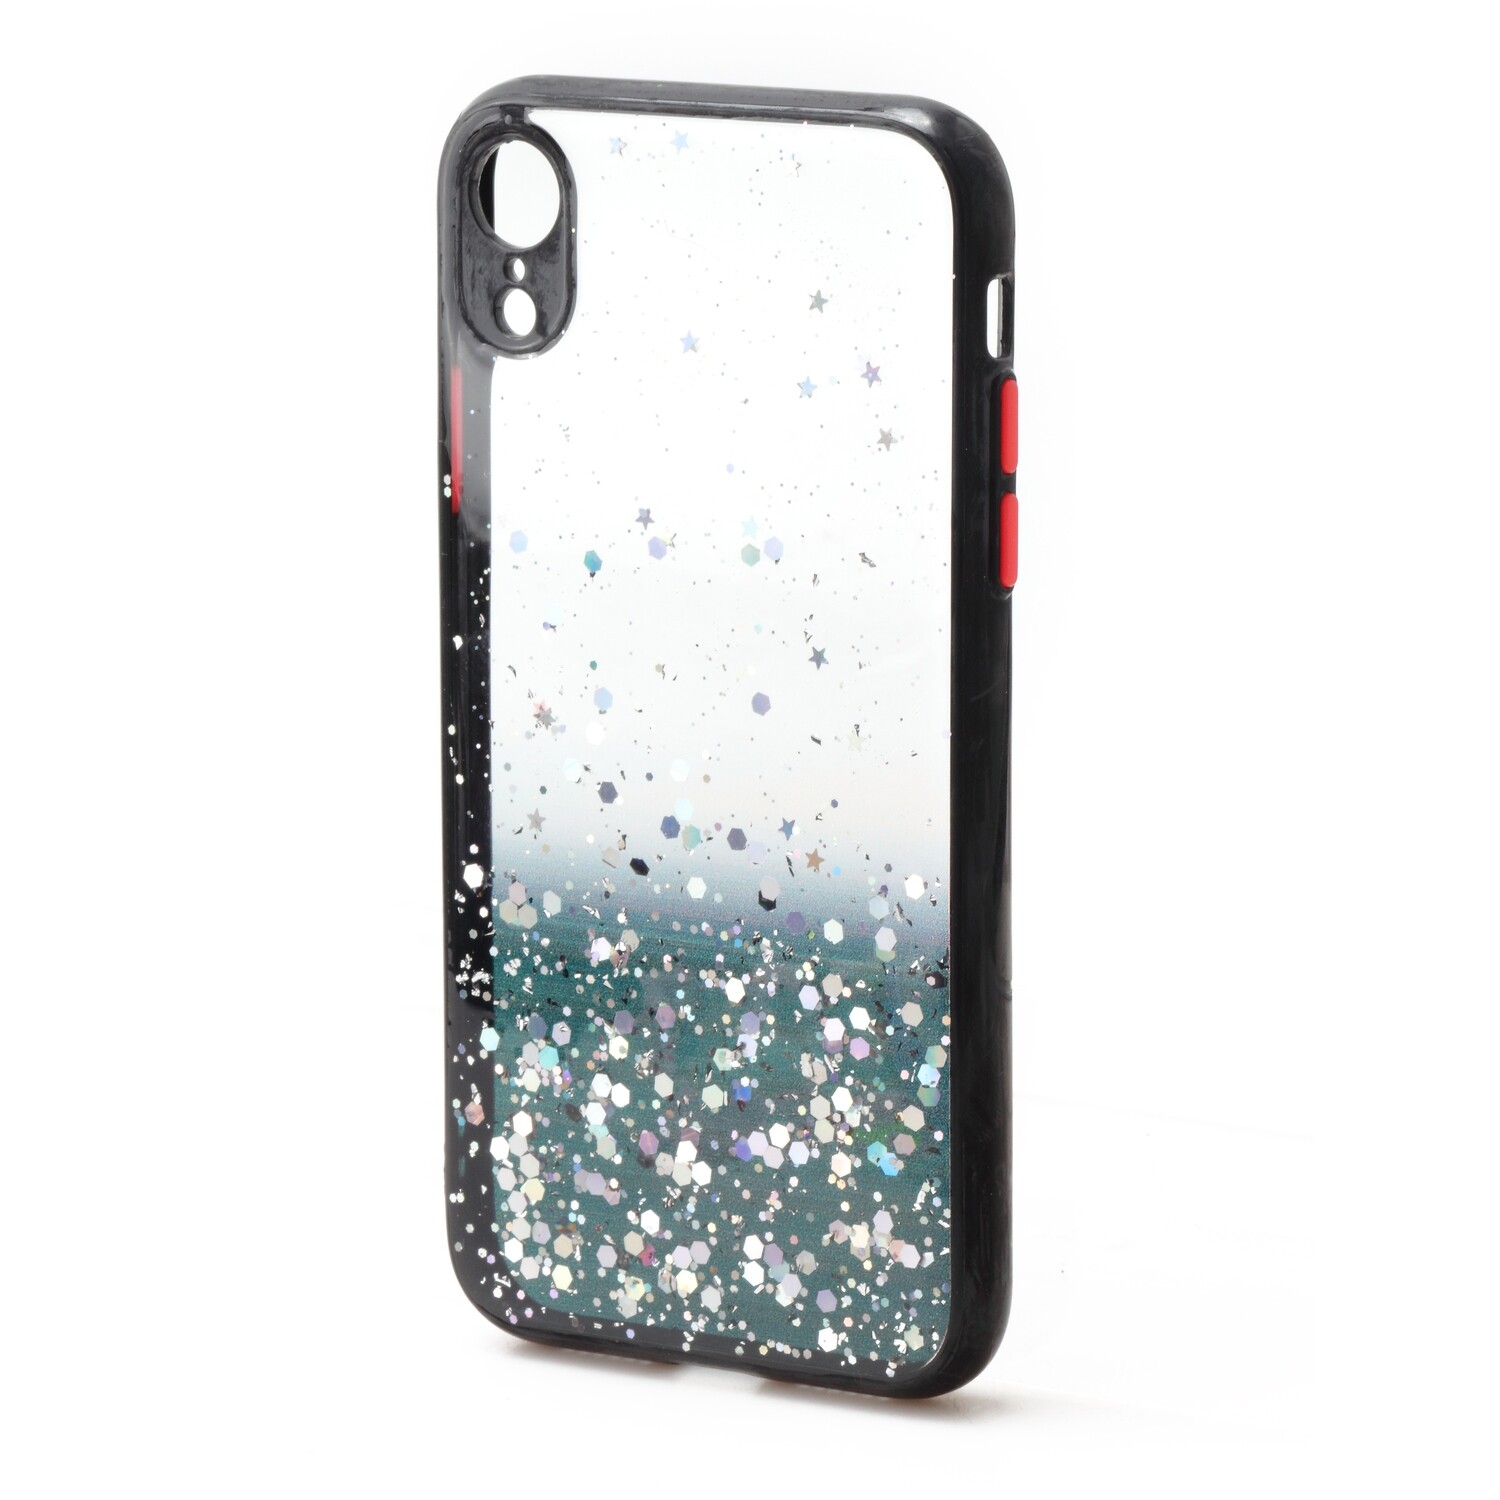 iPhone X / Xs 5.8 Shinning Gradient Case, Color: Black